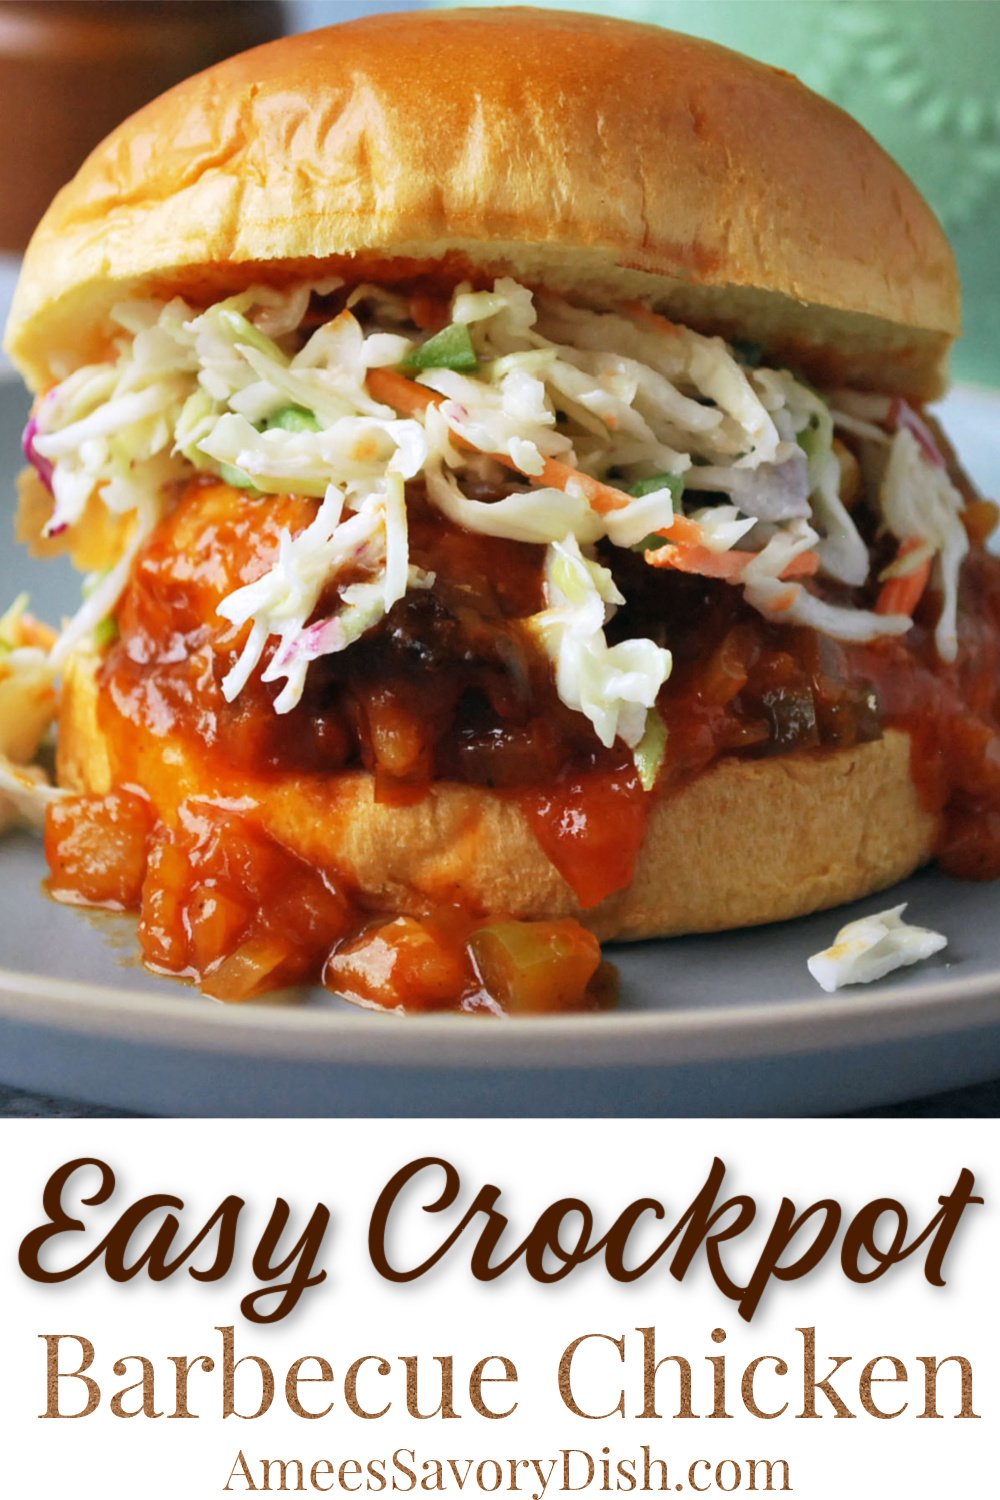 A flavorful recipe for Crockpot BBQ chicken that cooks while you go about your day!  Serve as pulled BBQ chicken or whole with your favorite sides. #crockpotBBQchicken #bbqchicken #crockpotchicken #barbecuechicken #easyhealthymeals #chickenrecipe #slowcookerbbq via @Ameessavorydish